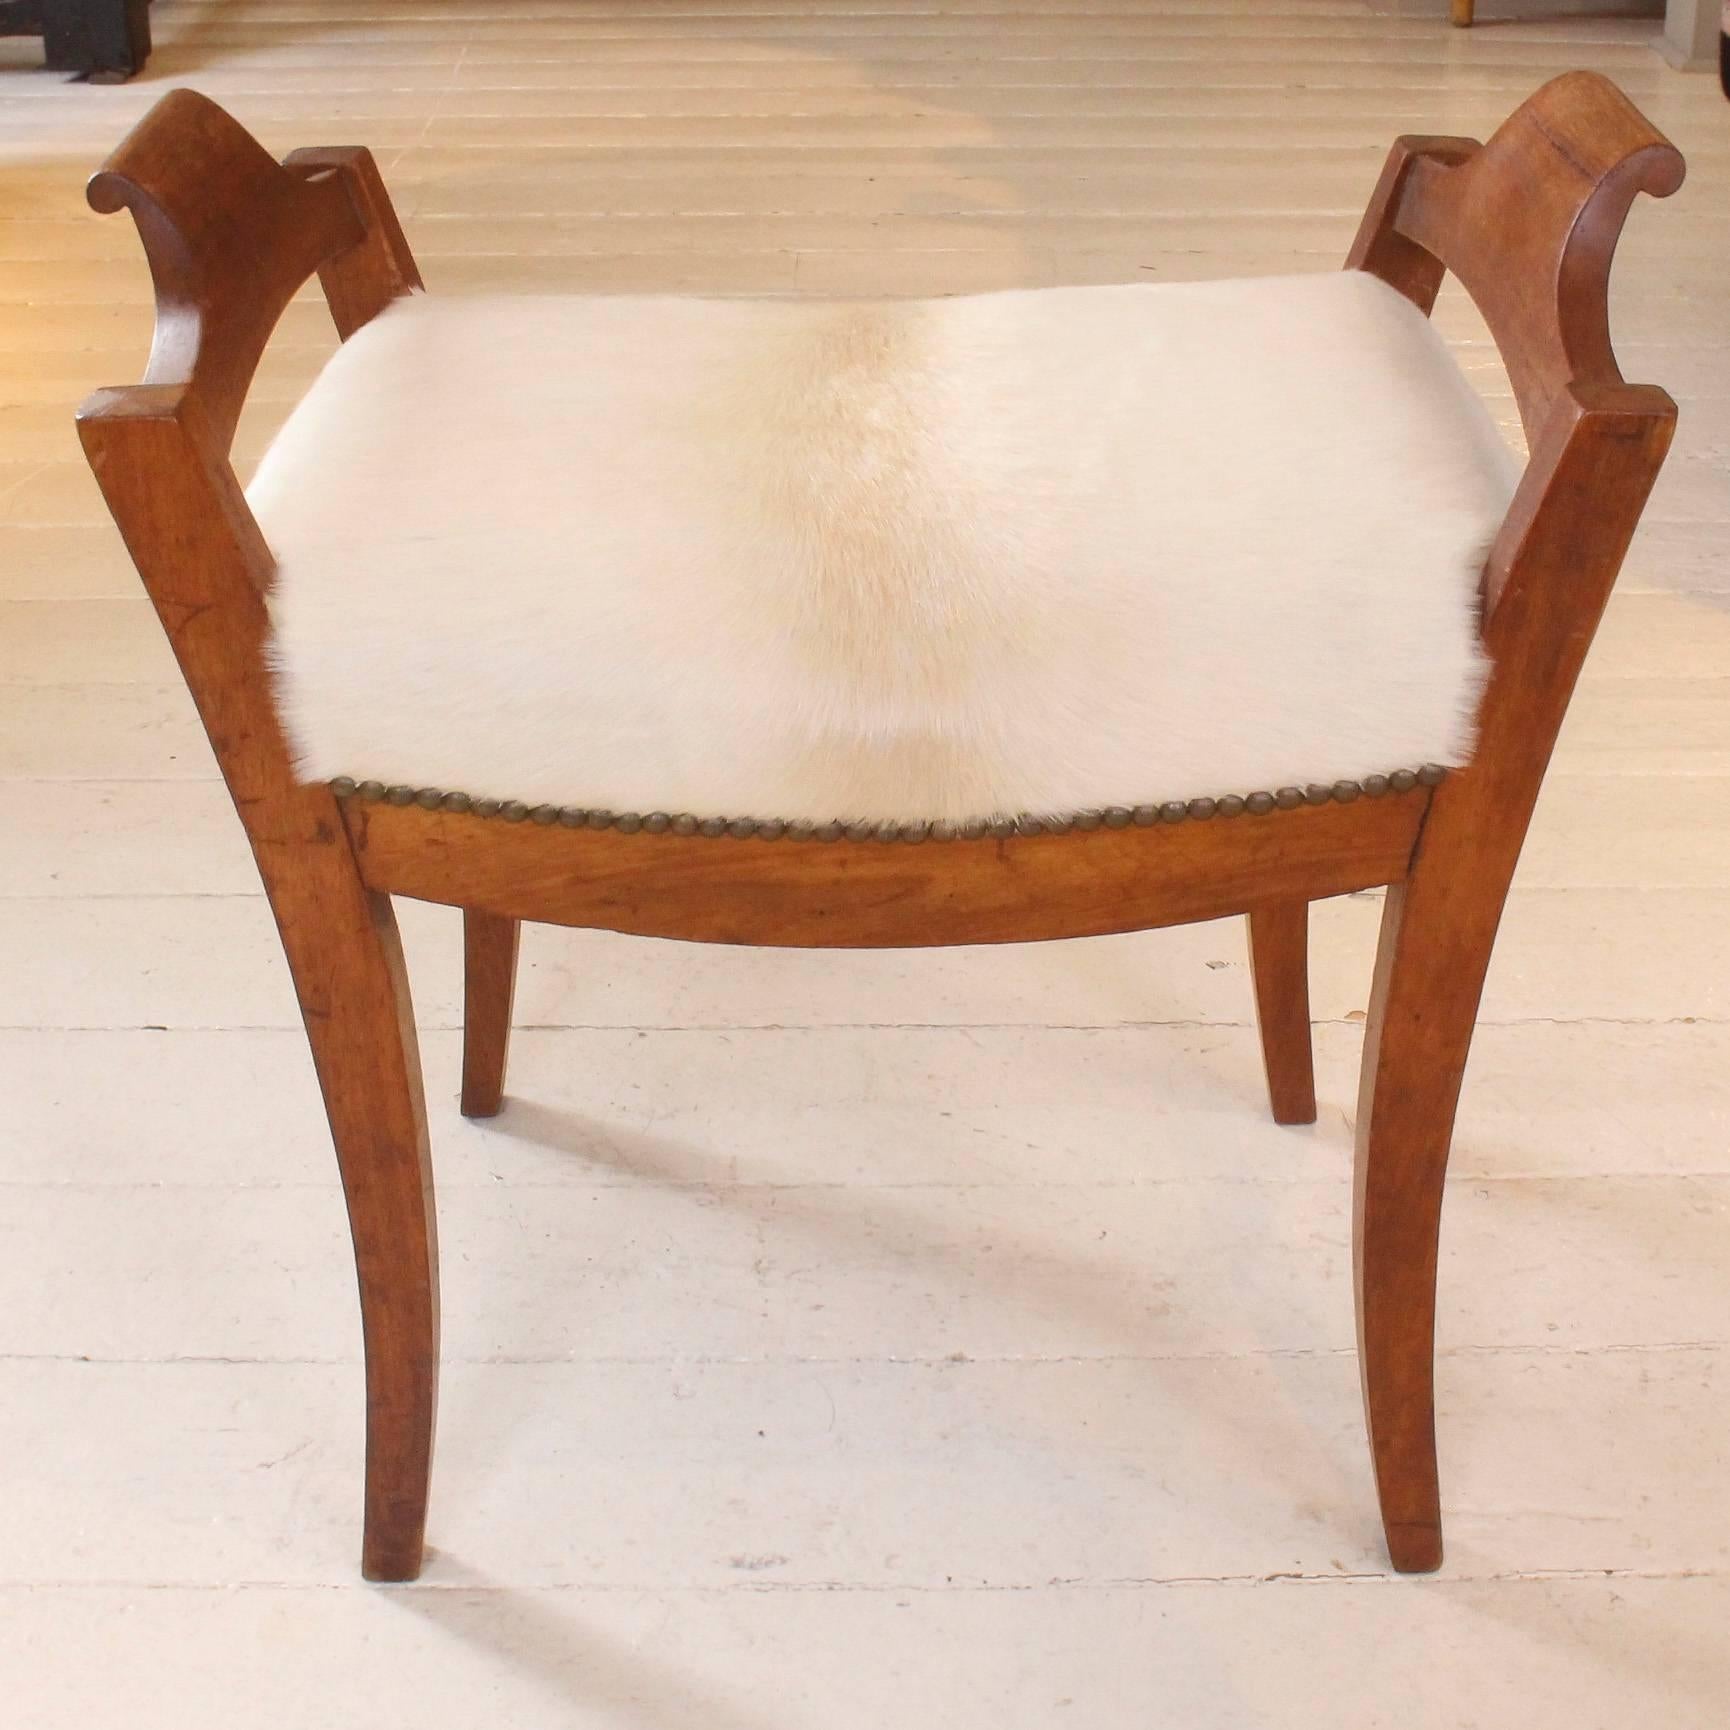 Petite bench, 19th century Sweden, in the Karl Johan style with seat in ivory calfskin.